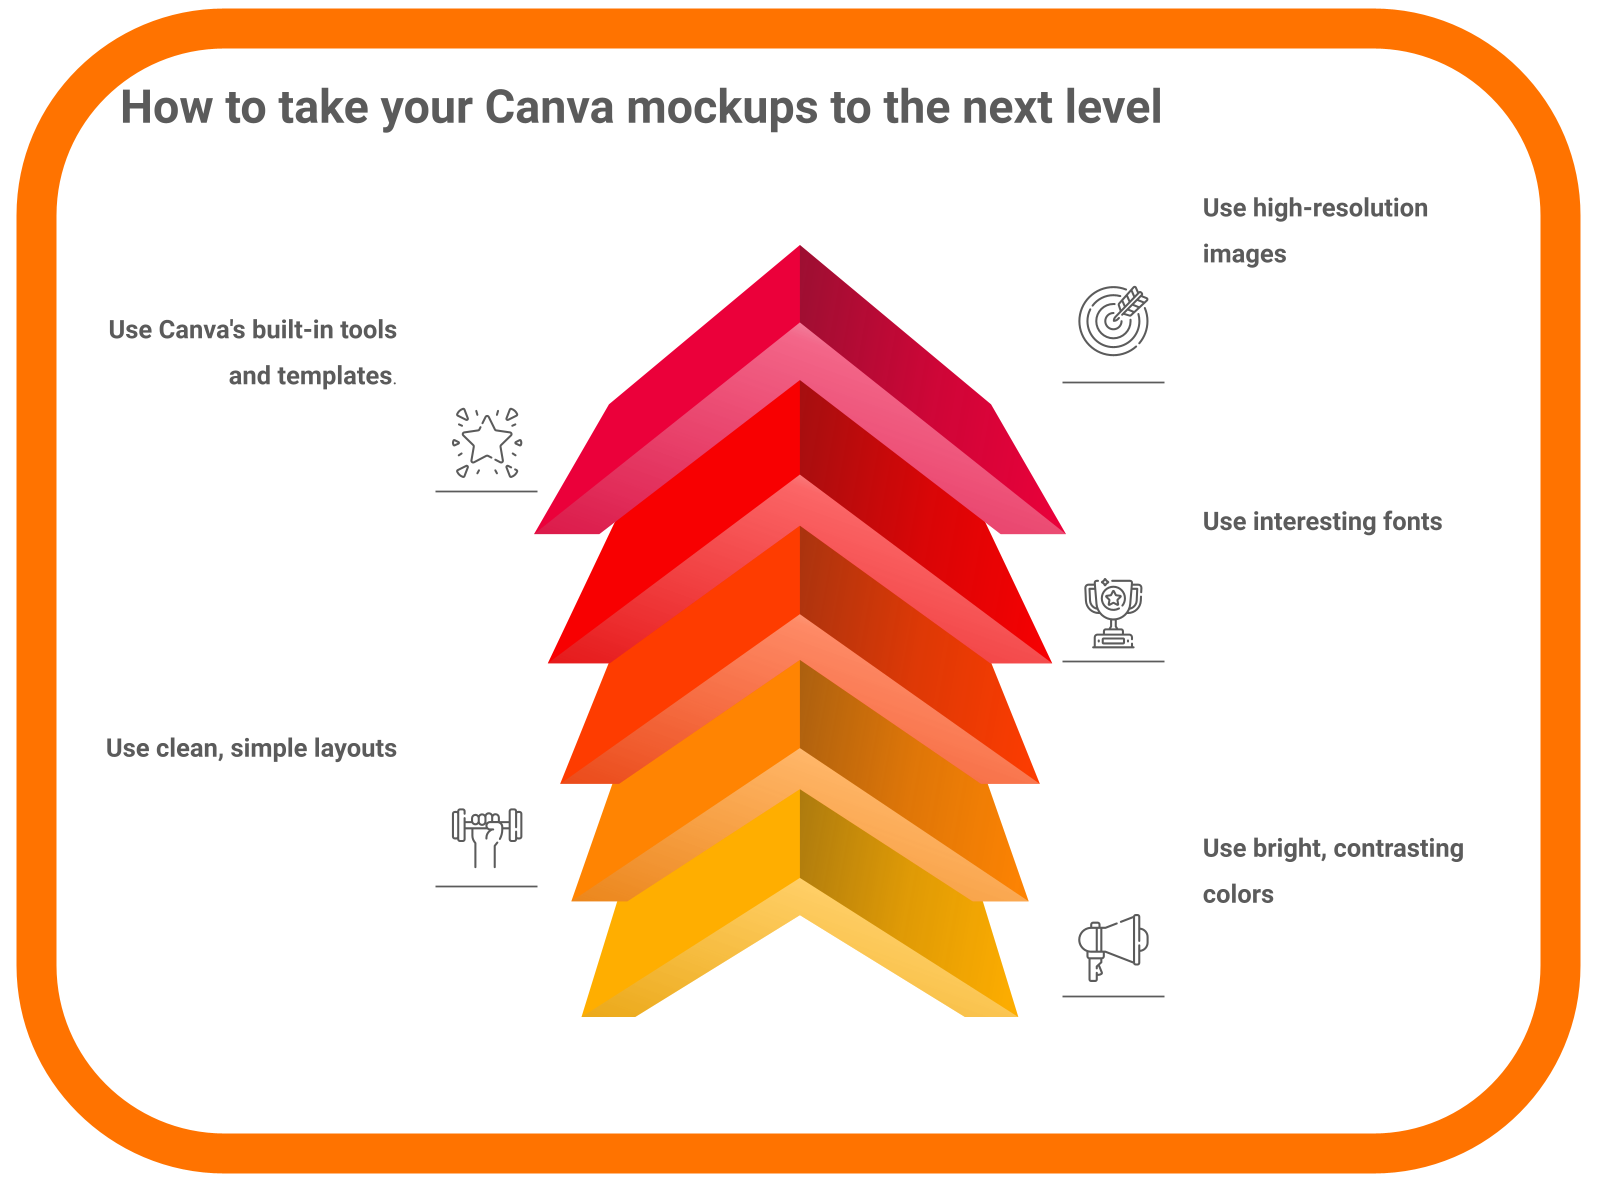 How to take your Canva mockups to the next level